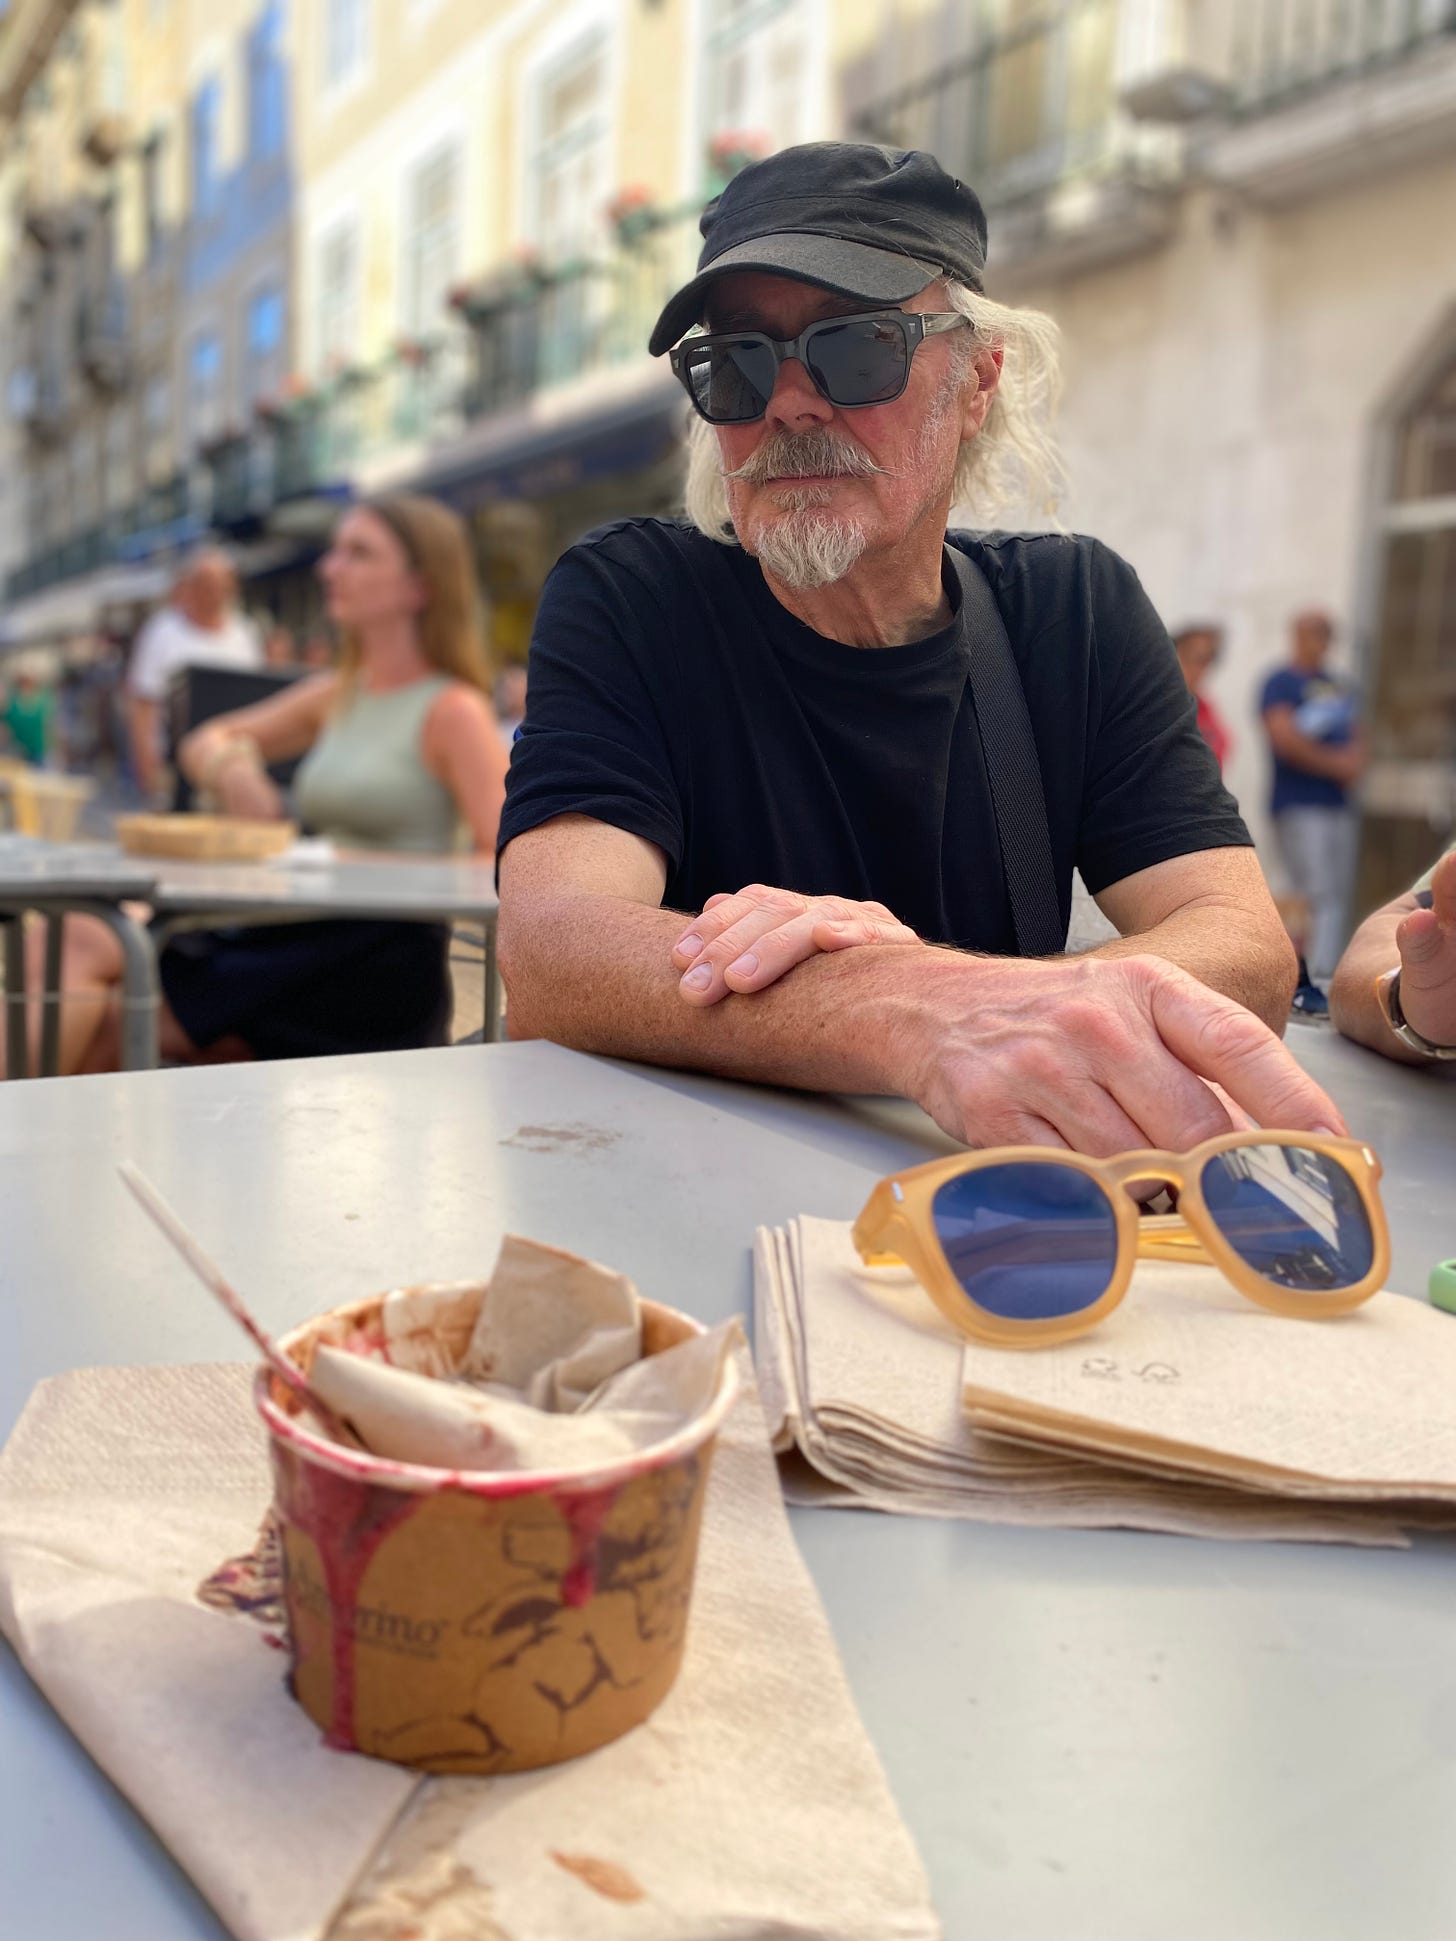 Simon Campbell in Lisbon and an empty icecream tub and sunglasses on the table